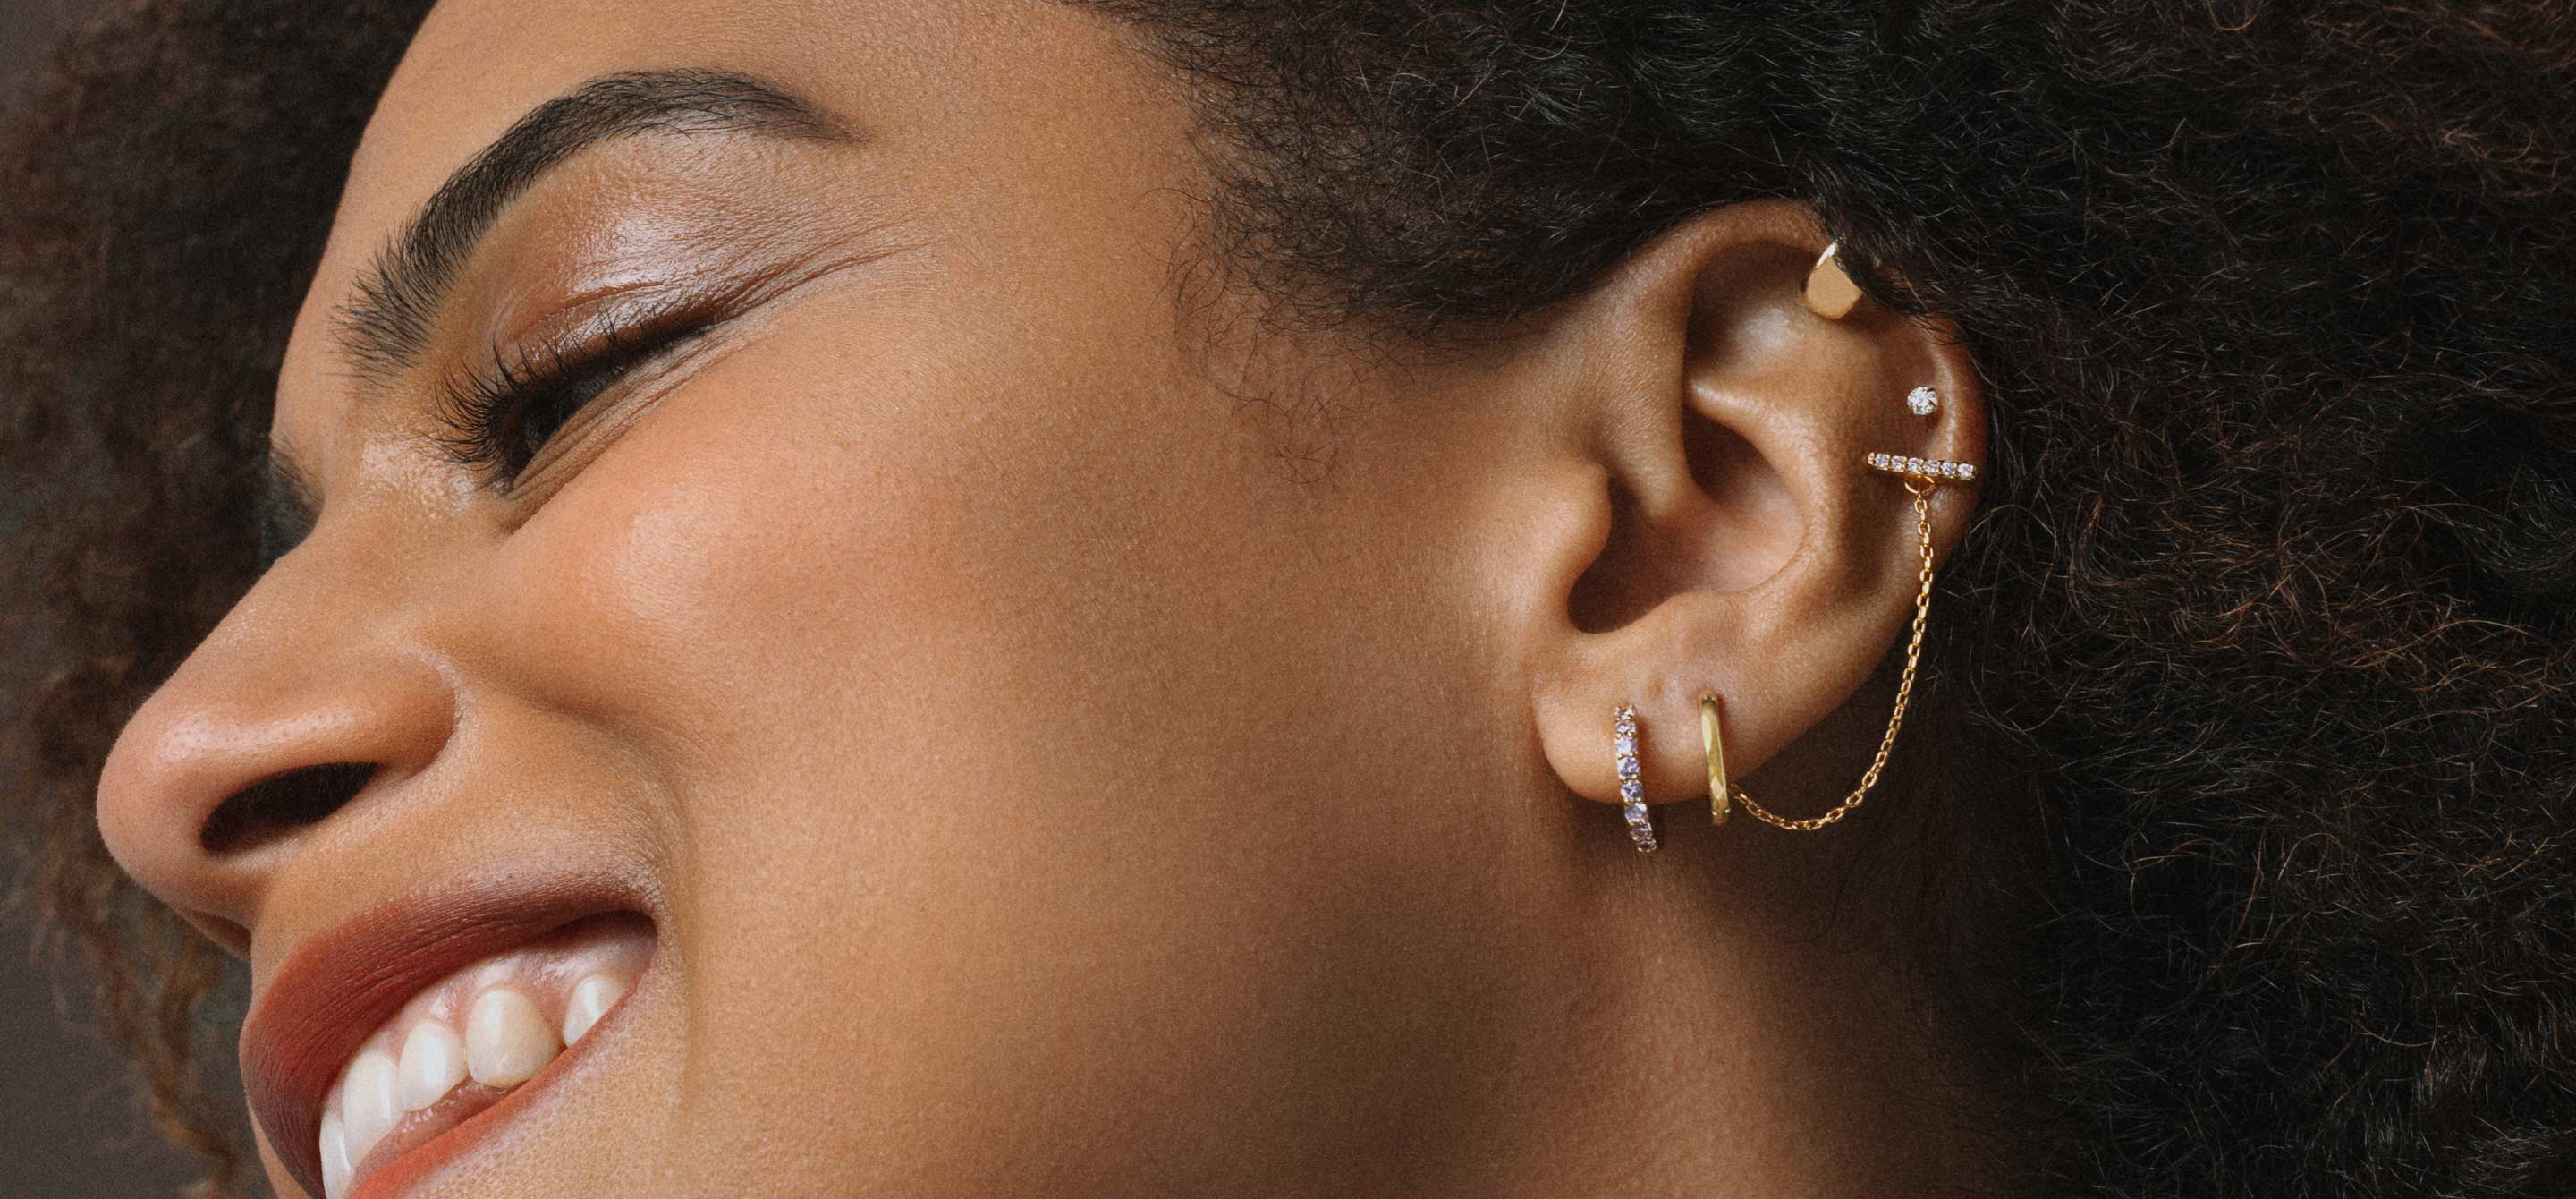 Ear Piercings and Your Health: What You Need to Know